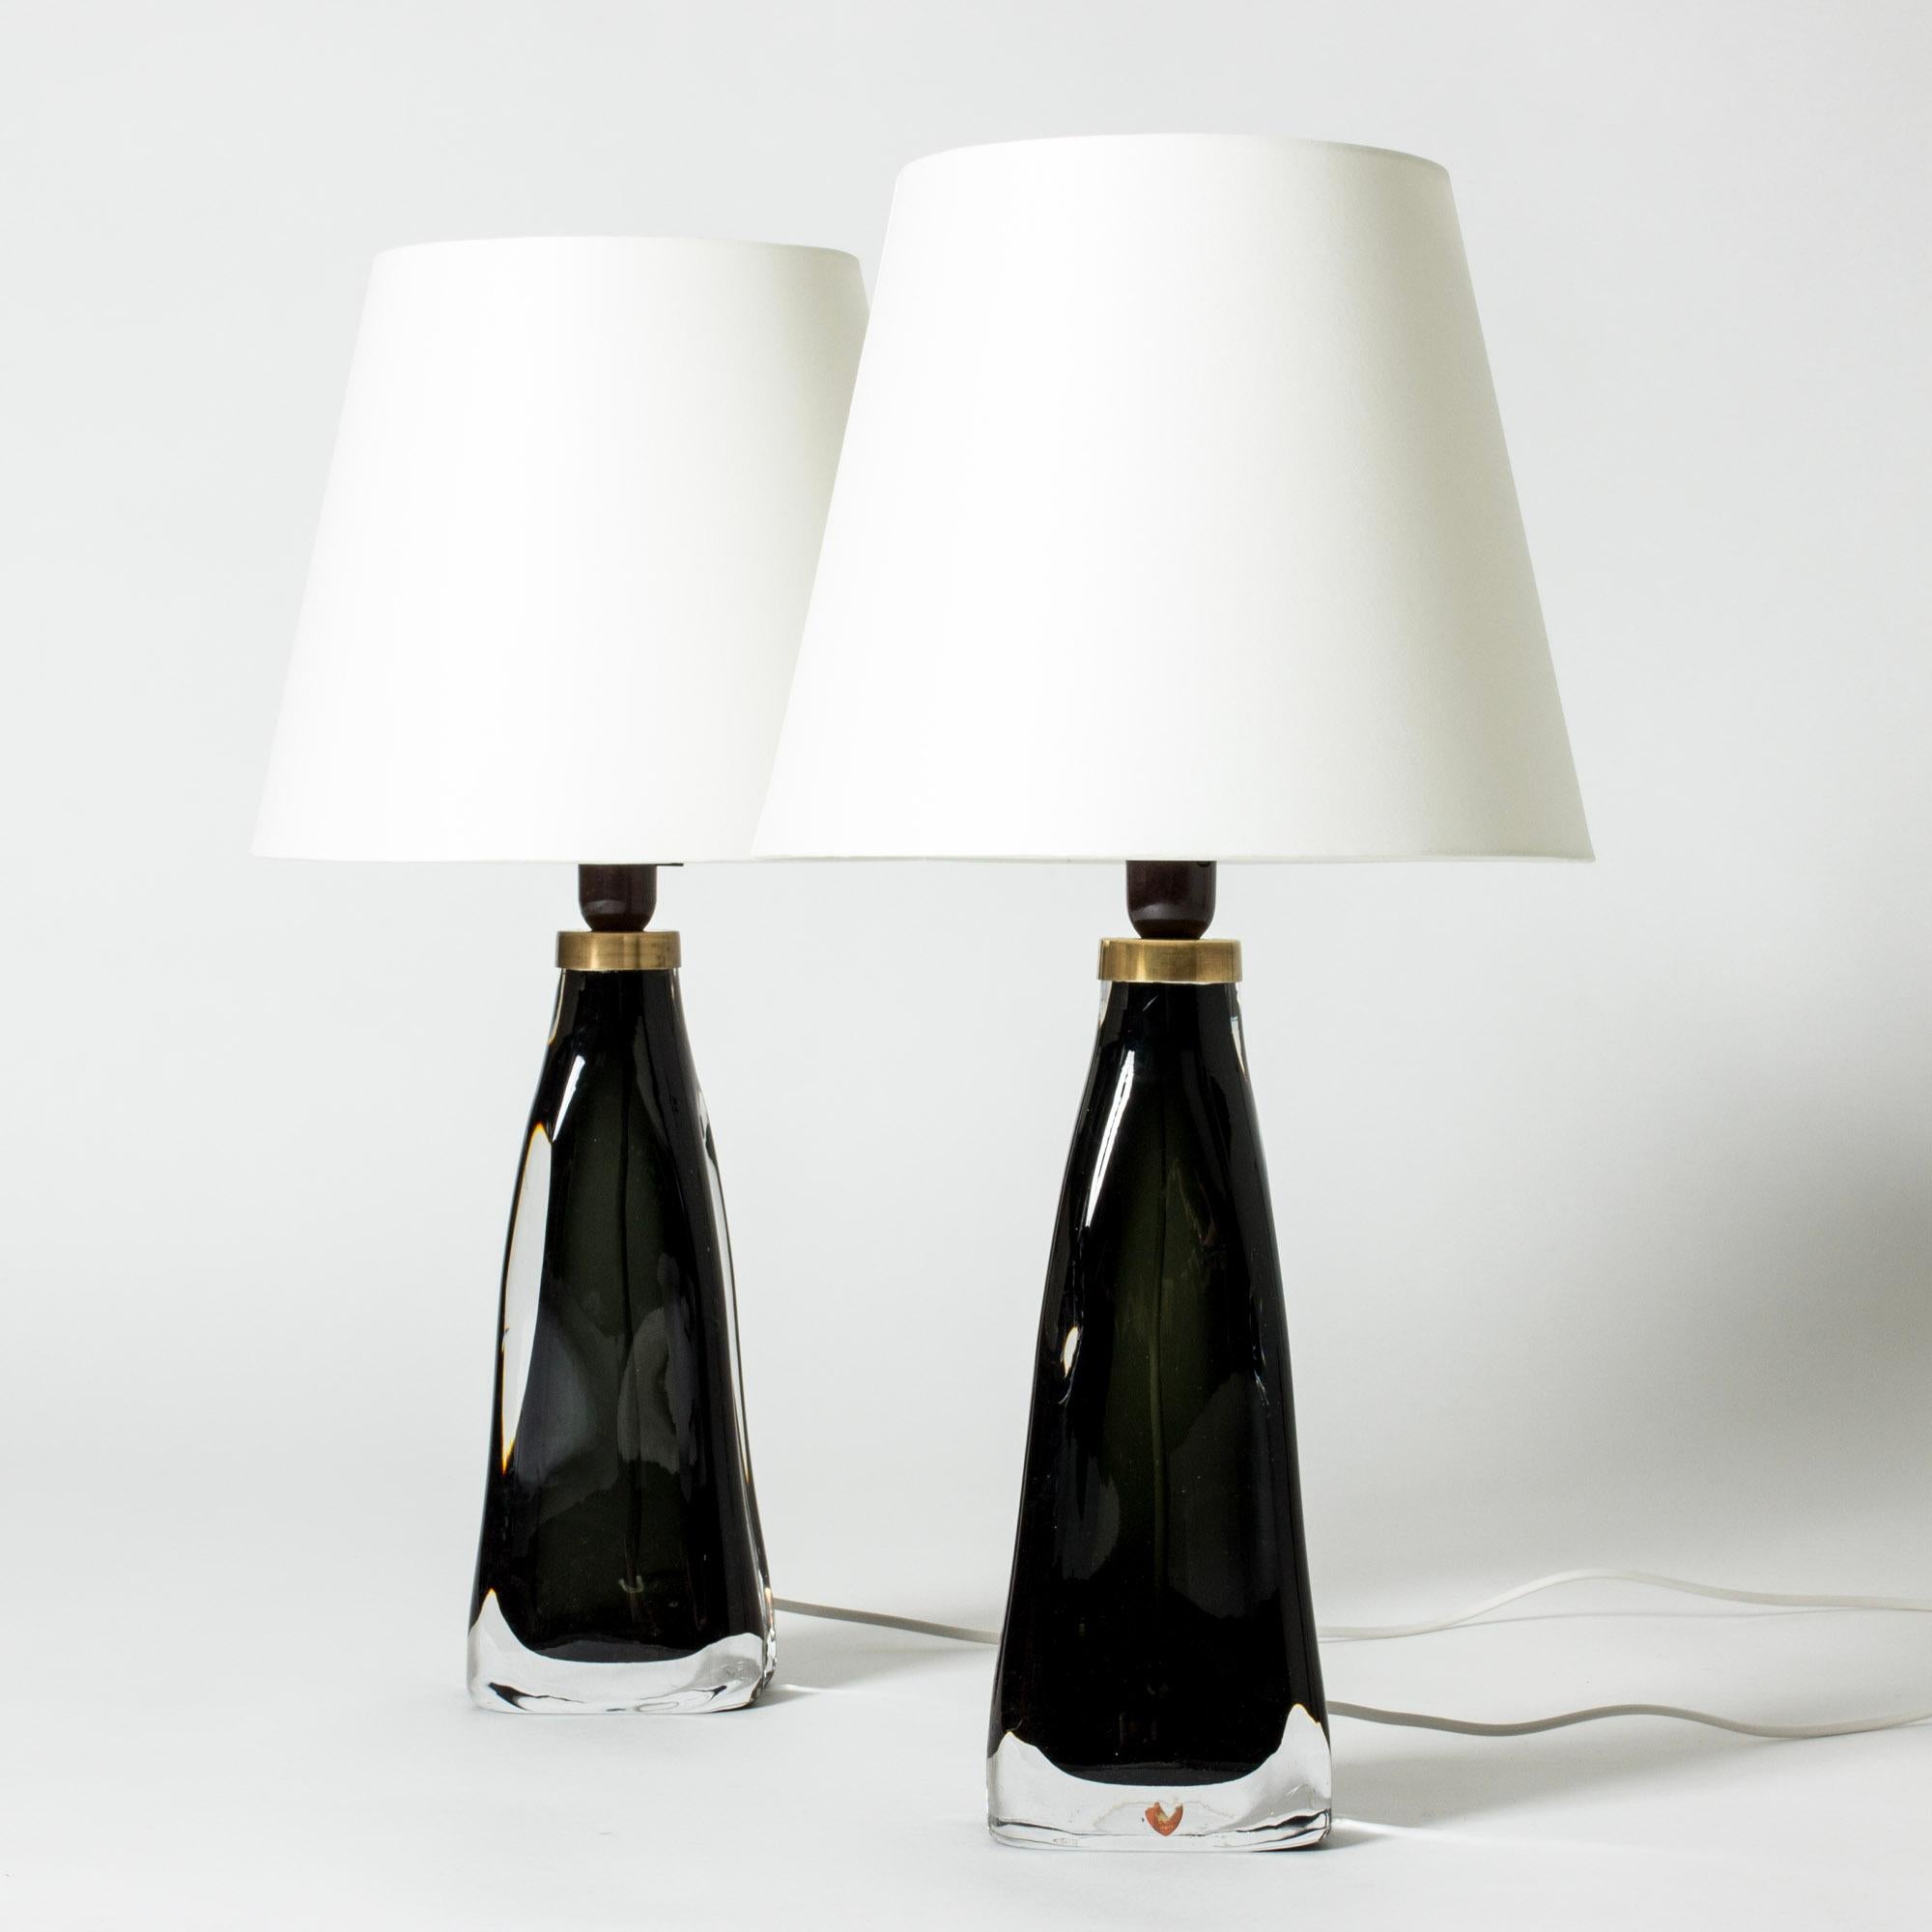 Midcentury Glass Table Lamps by Carl Fagerlund, Orrefors, Sweden, 1960s For Sale 1